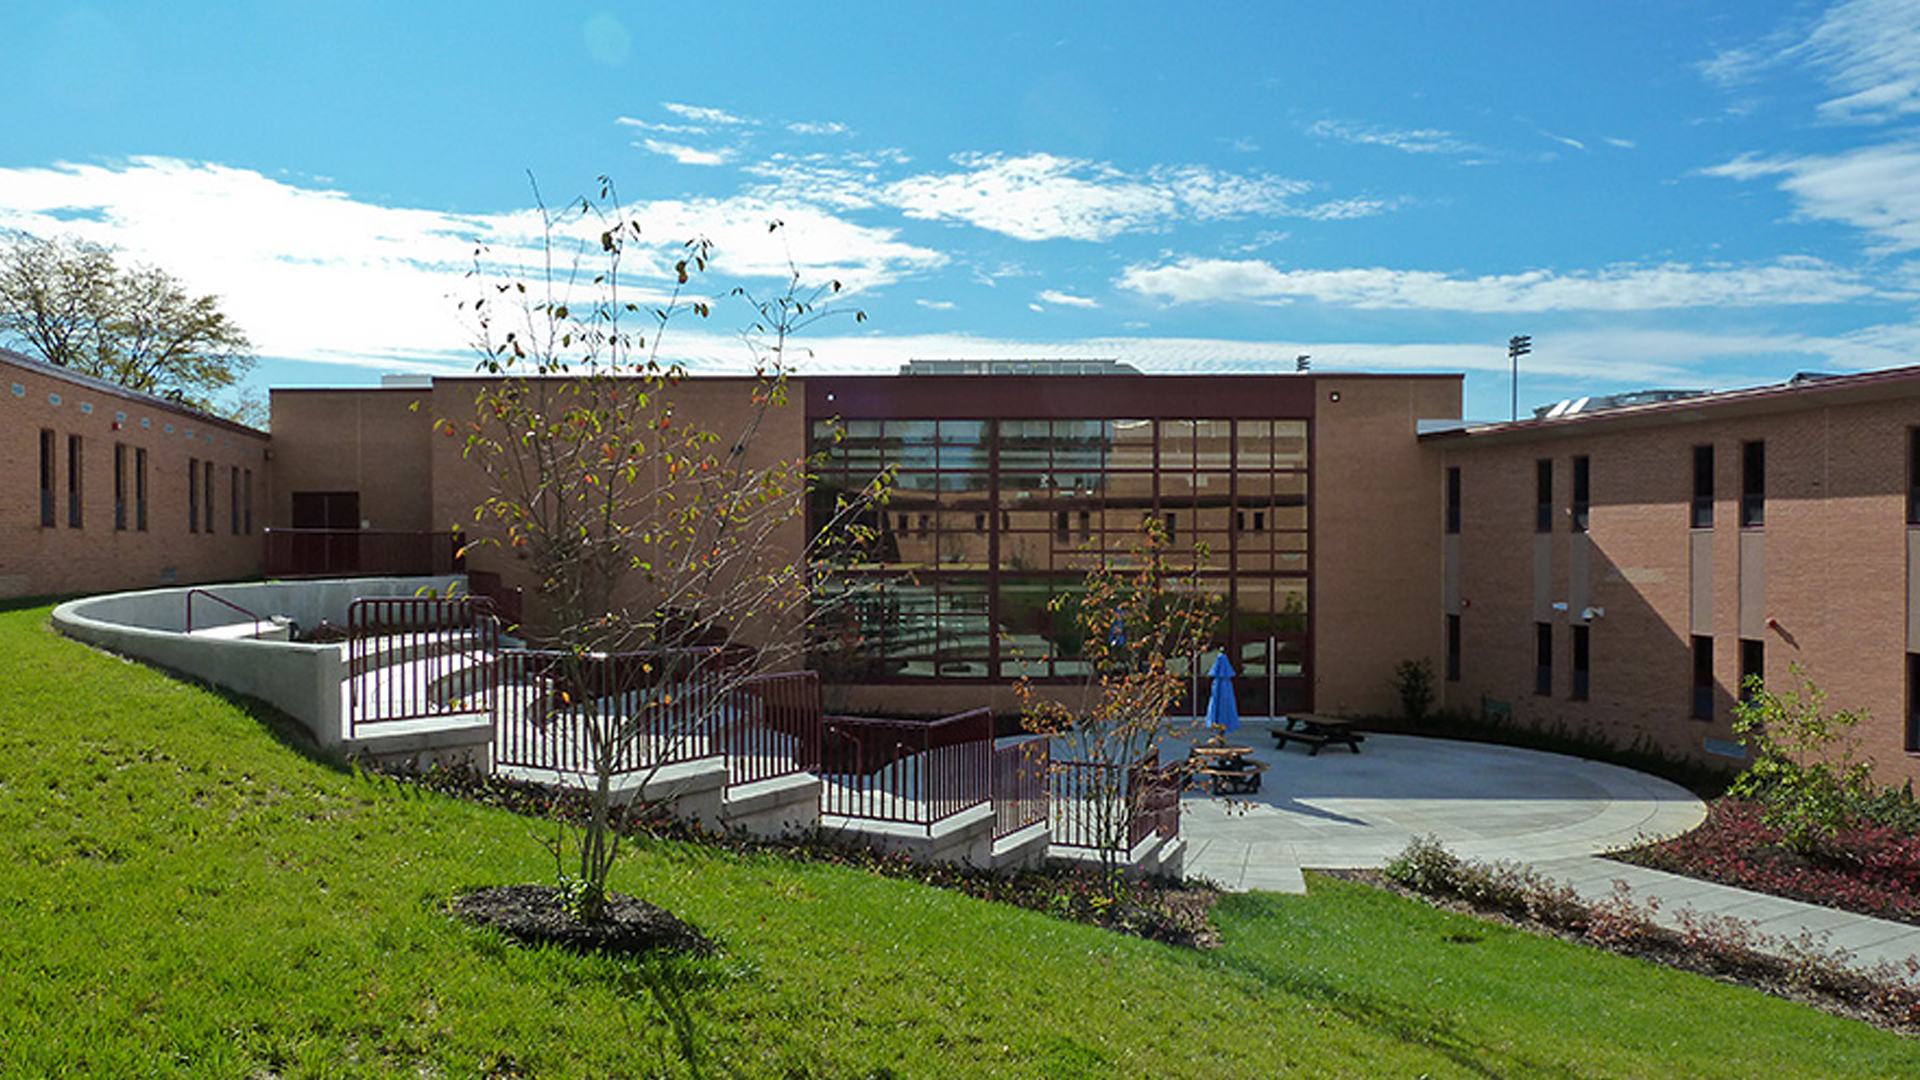 derry township school district early childhood center